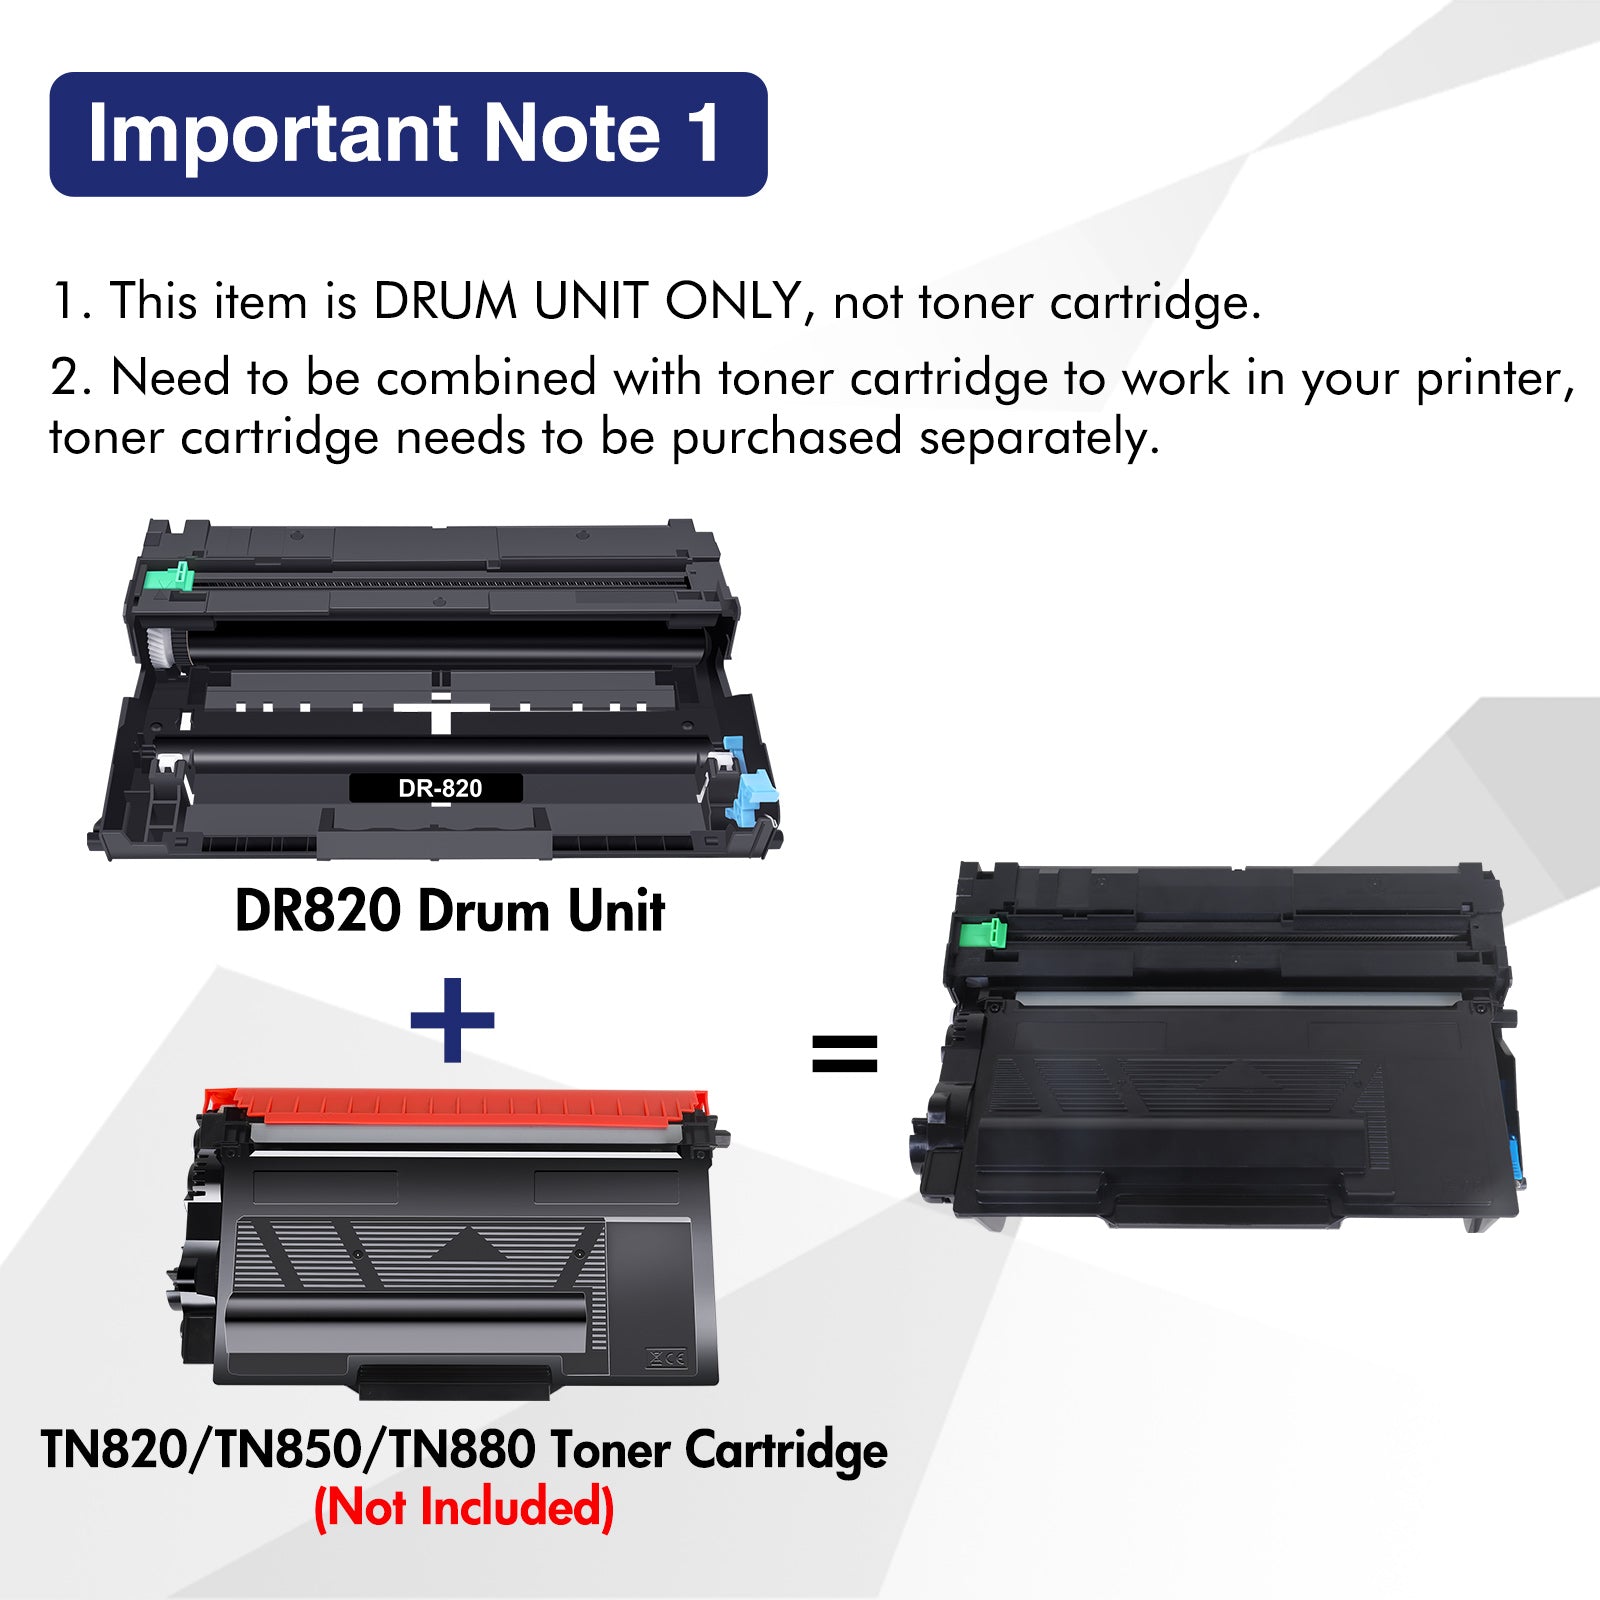 Amstech 1-Pack Compatible Drum Unit for Brother DR-820 DR820 DR 820 HL-L5000D L5200DW L6400DW MFC-L5700DW L5850DW L6700DW L6800DW DCP-L5500DN Printer(Black)